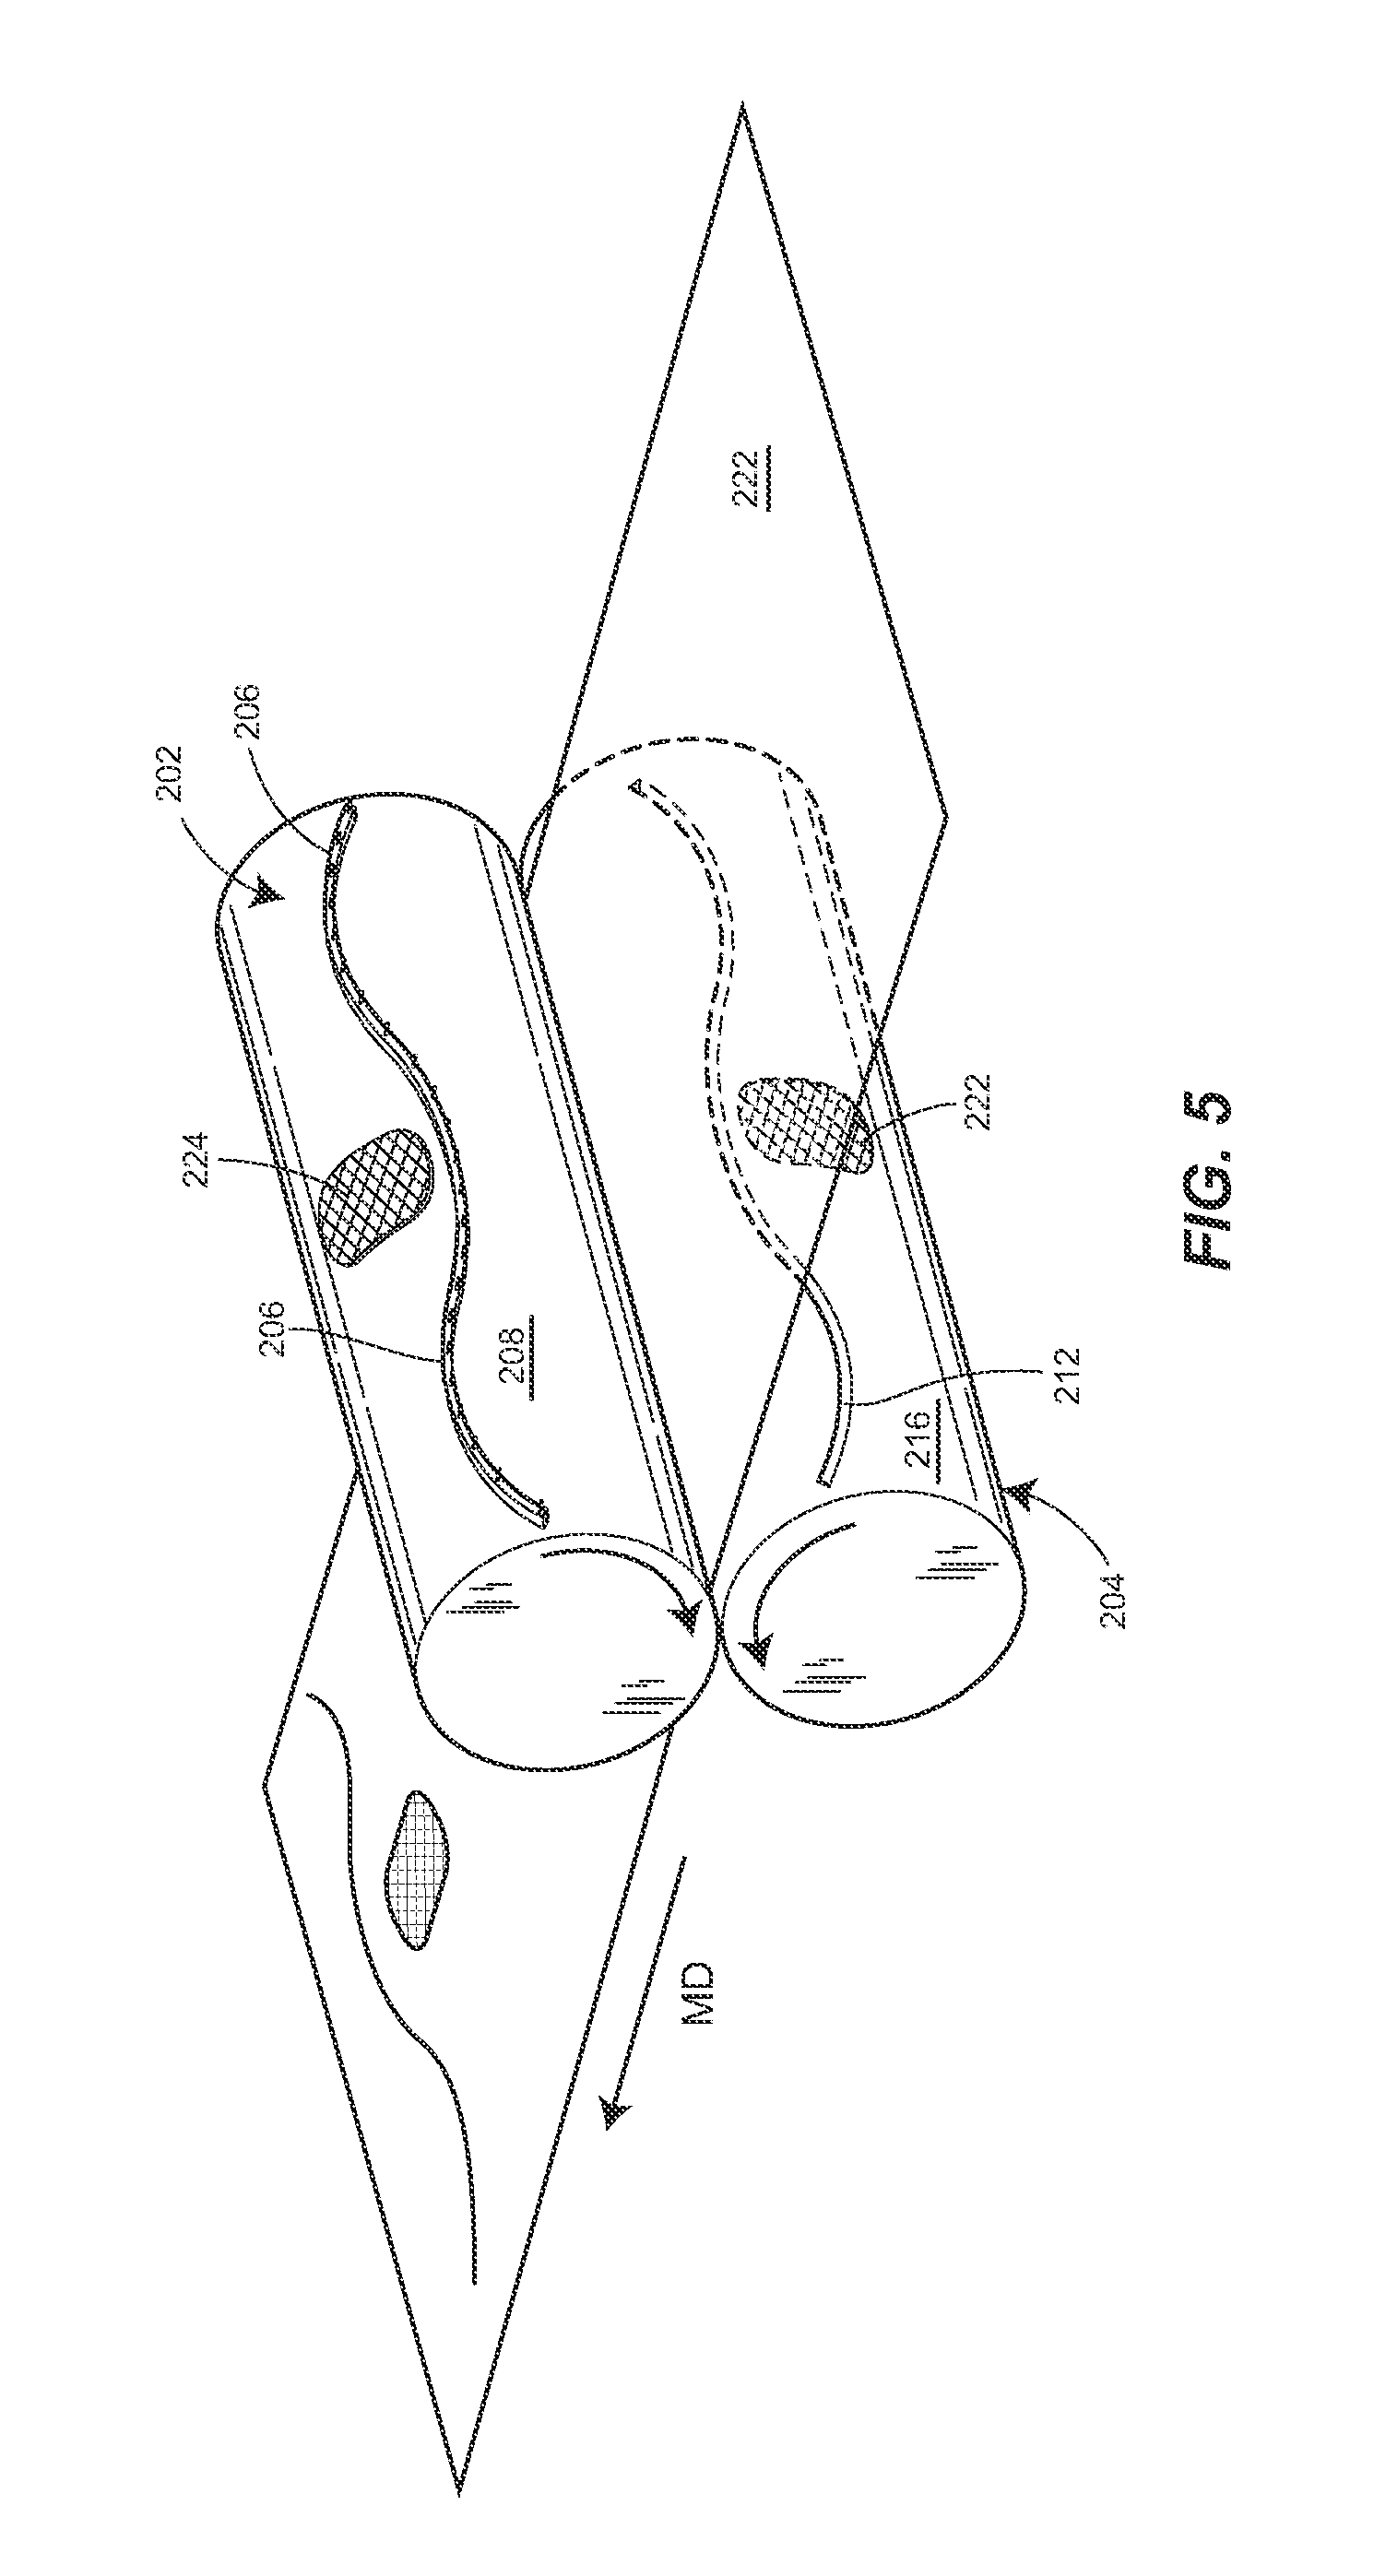 Method of perforating a web material